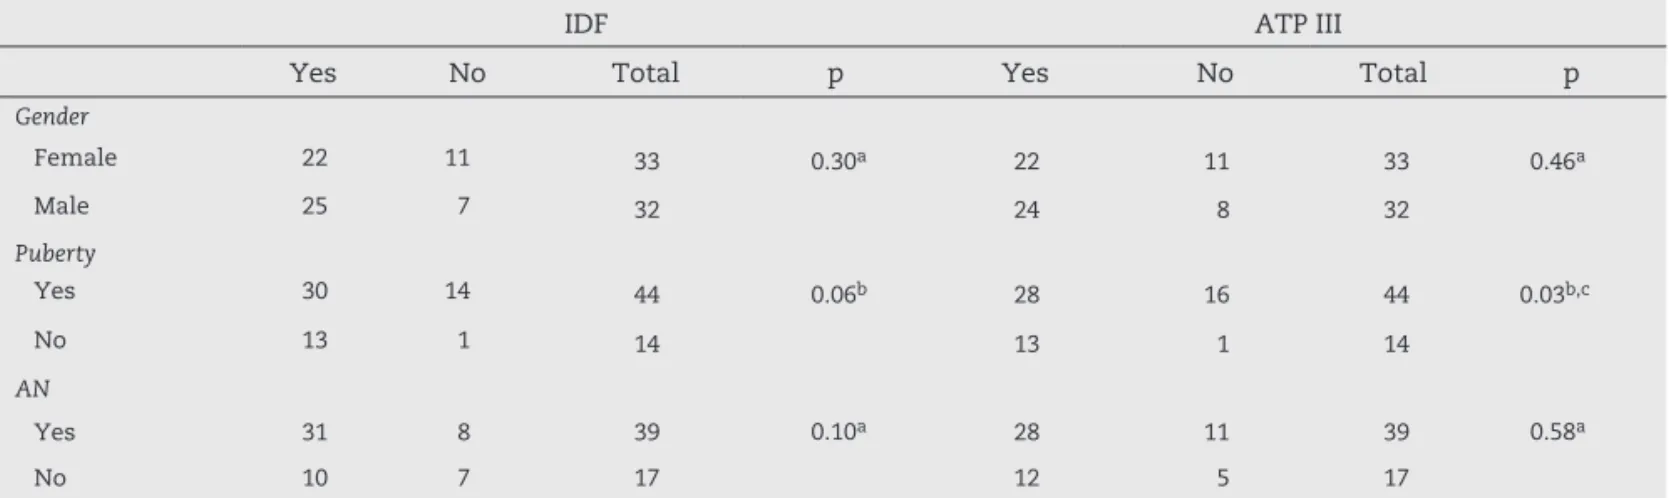 Table 2 – Analysis of gender, puberty, and acanthosis nigricans as risk factors for metabolic syndrome by IDF and ATP  III criteria.